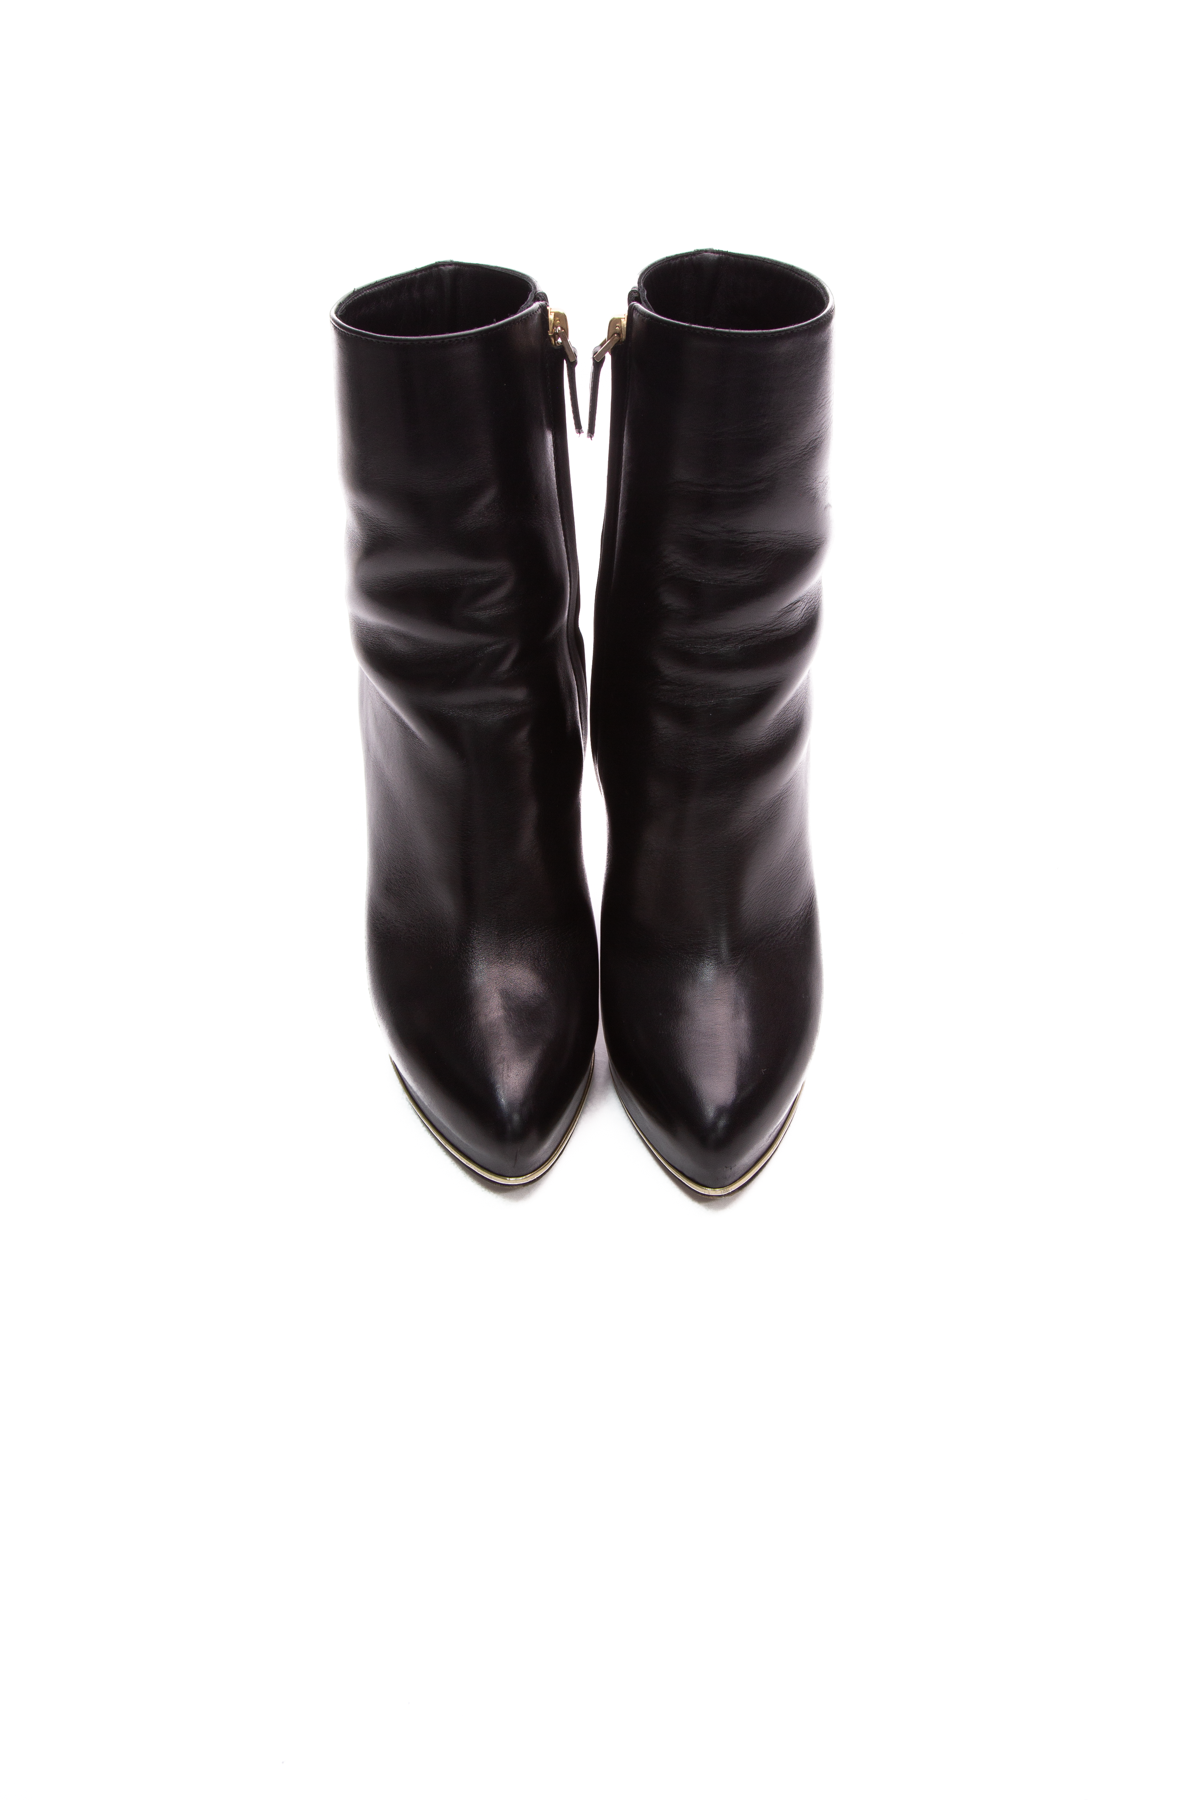  Givenchy Black Wedge Ankle Booties - Size 36